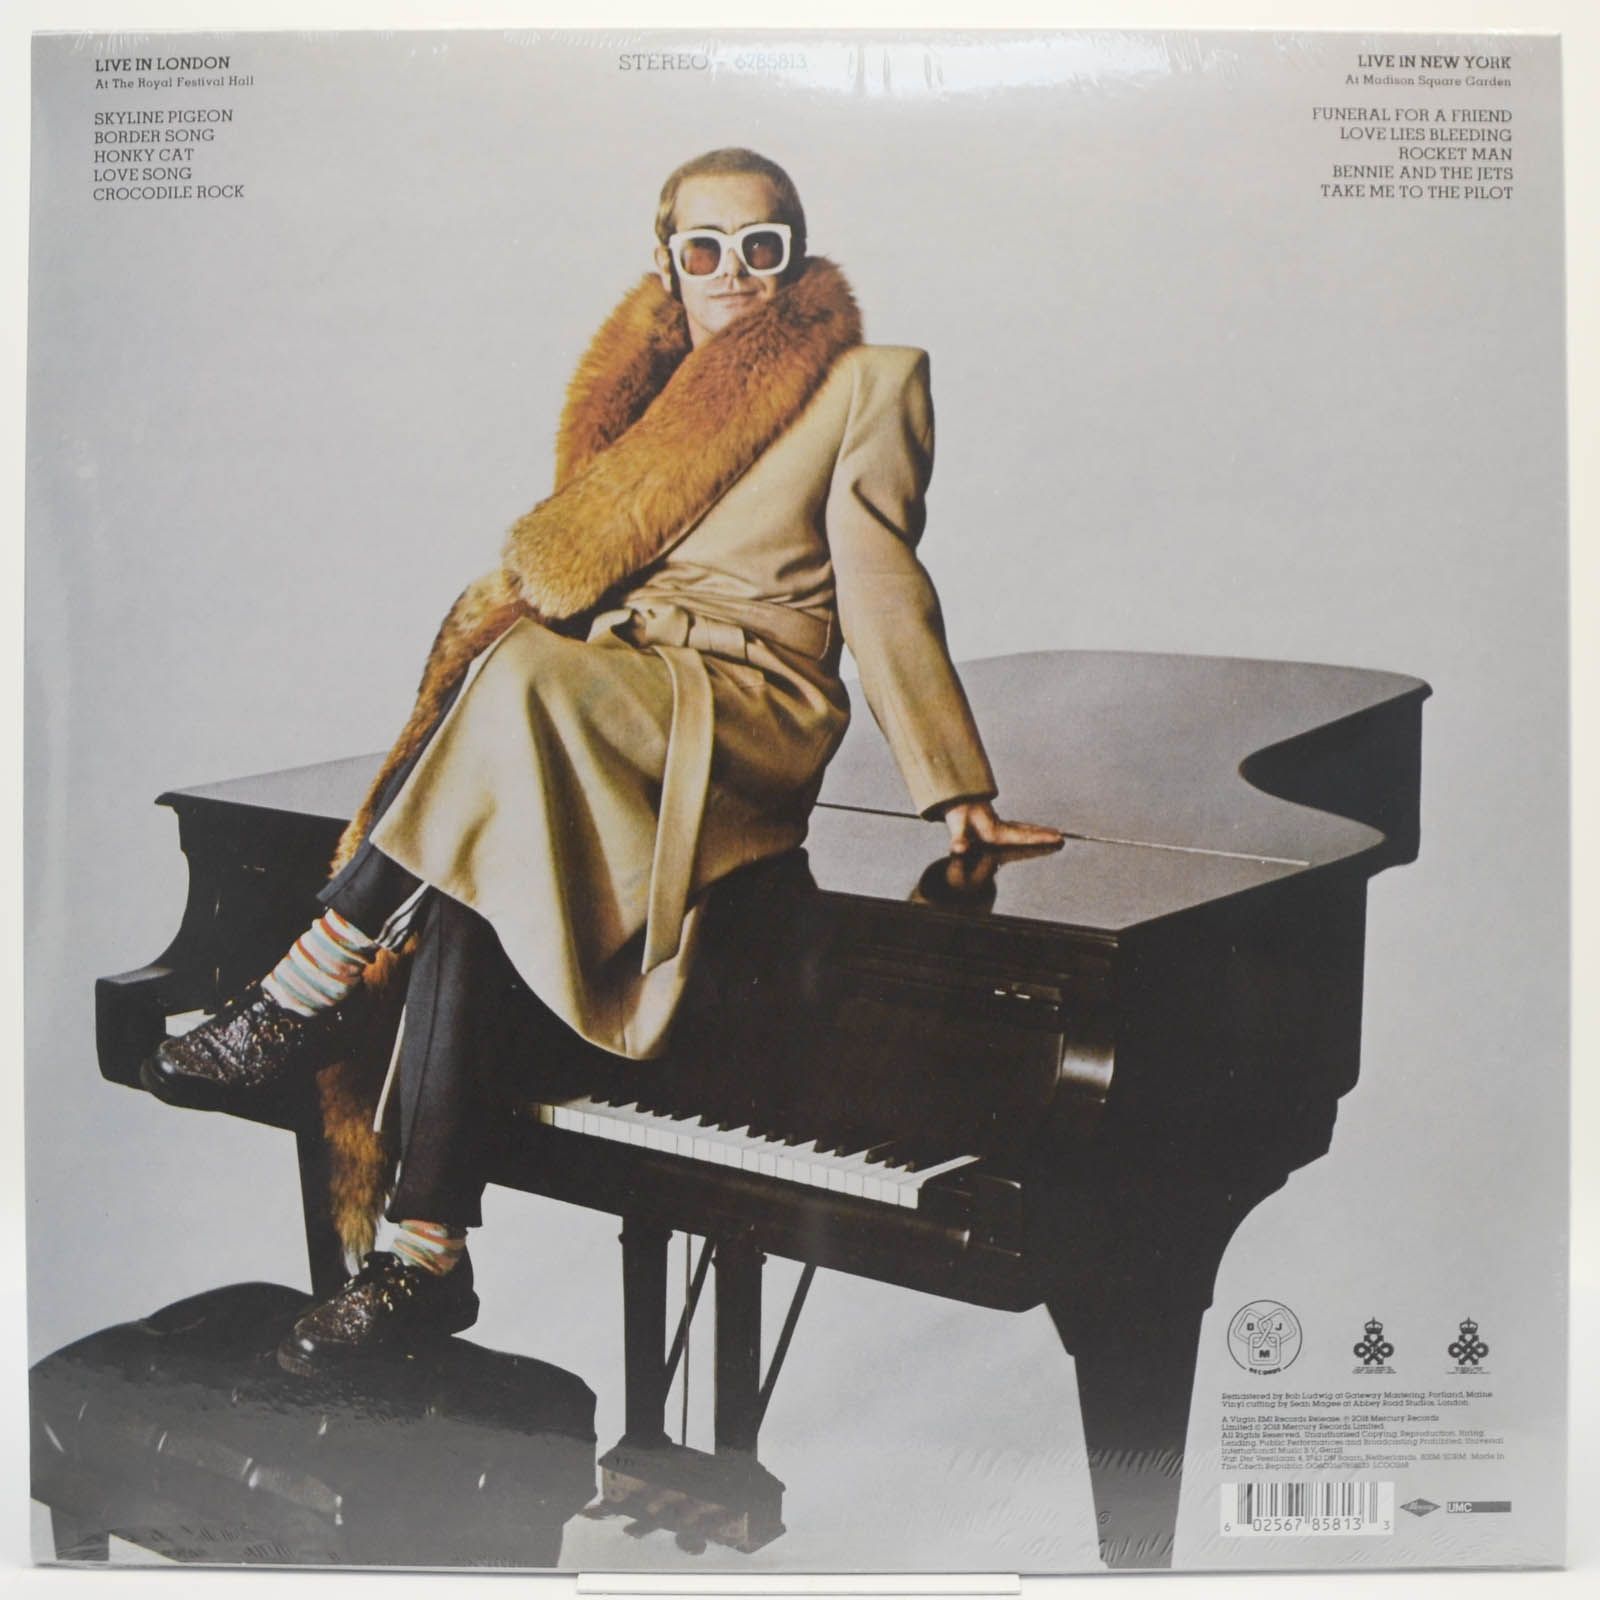 Elton John — Here And There, 1976